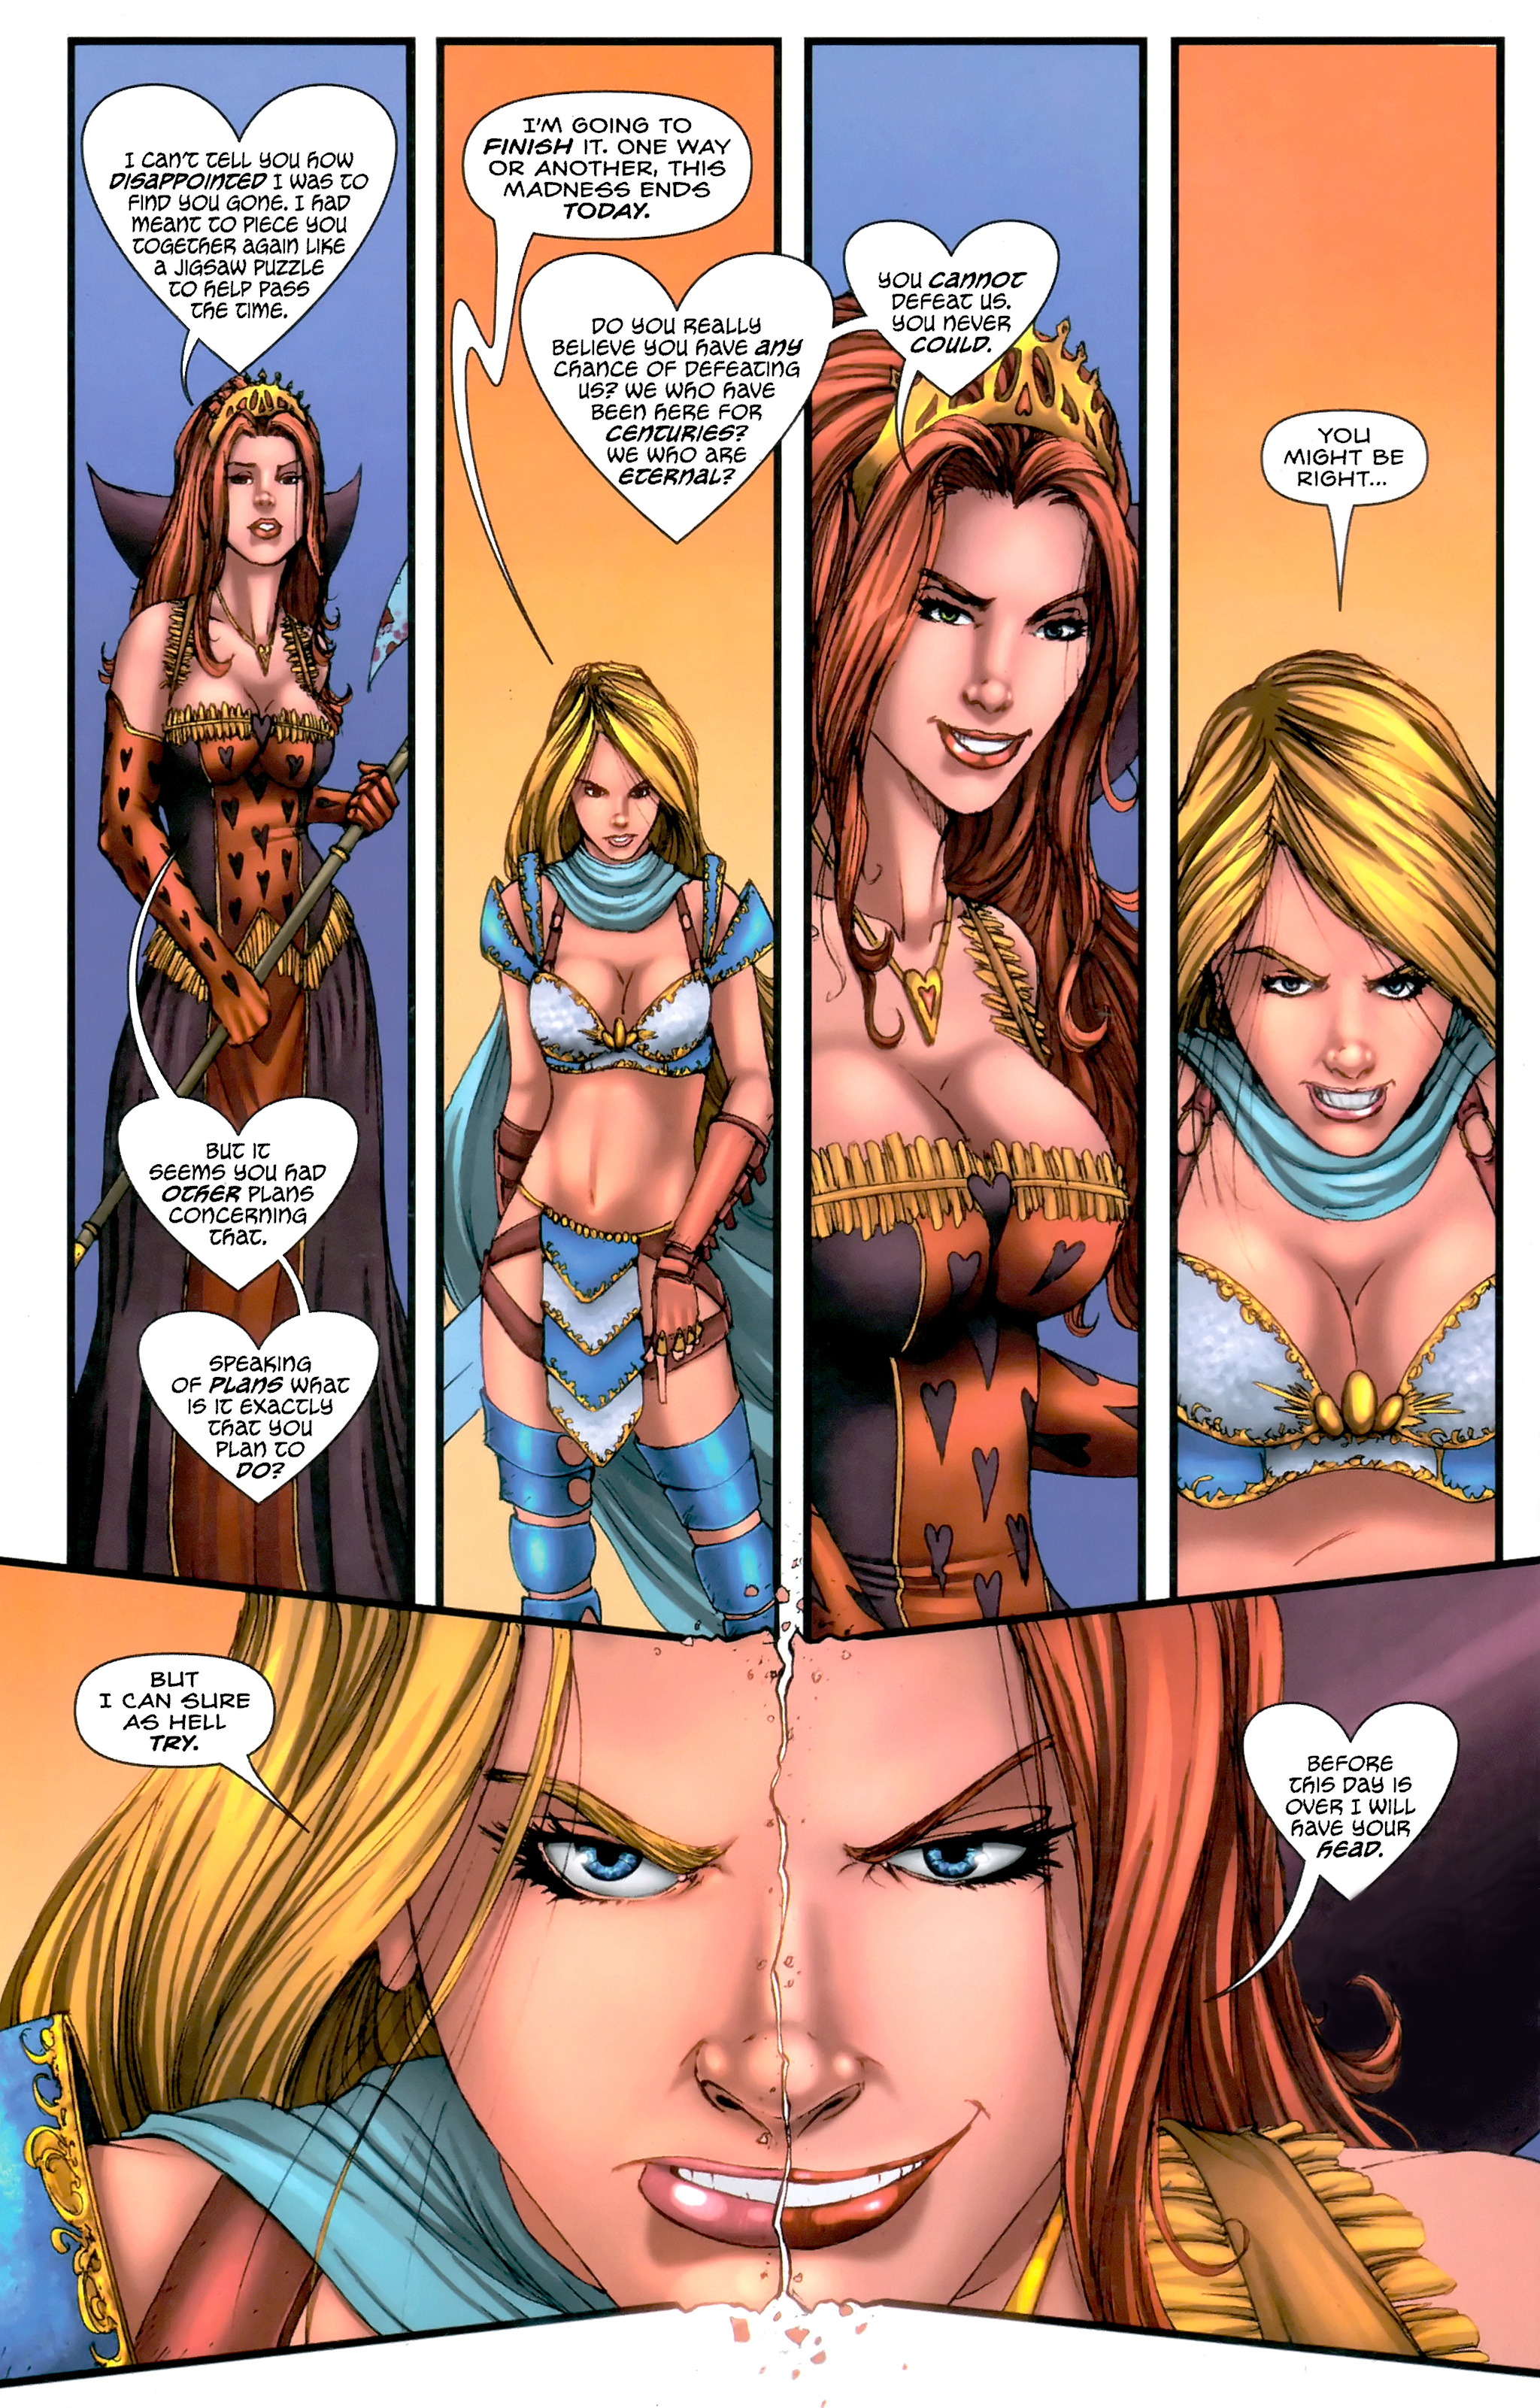 Grimm Fairy Tales Presents Alice In Wonderland Issue 6 | Read Grimm Fairy  Tales Presents Alice In Wonderland Issue 6 comic online in high quality.  Read Full Comic online for free -